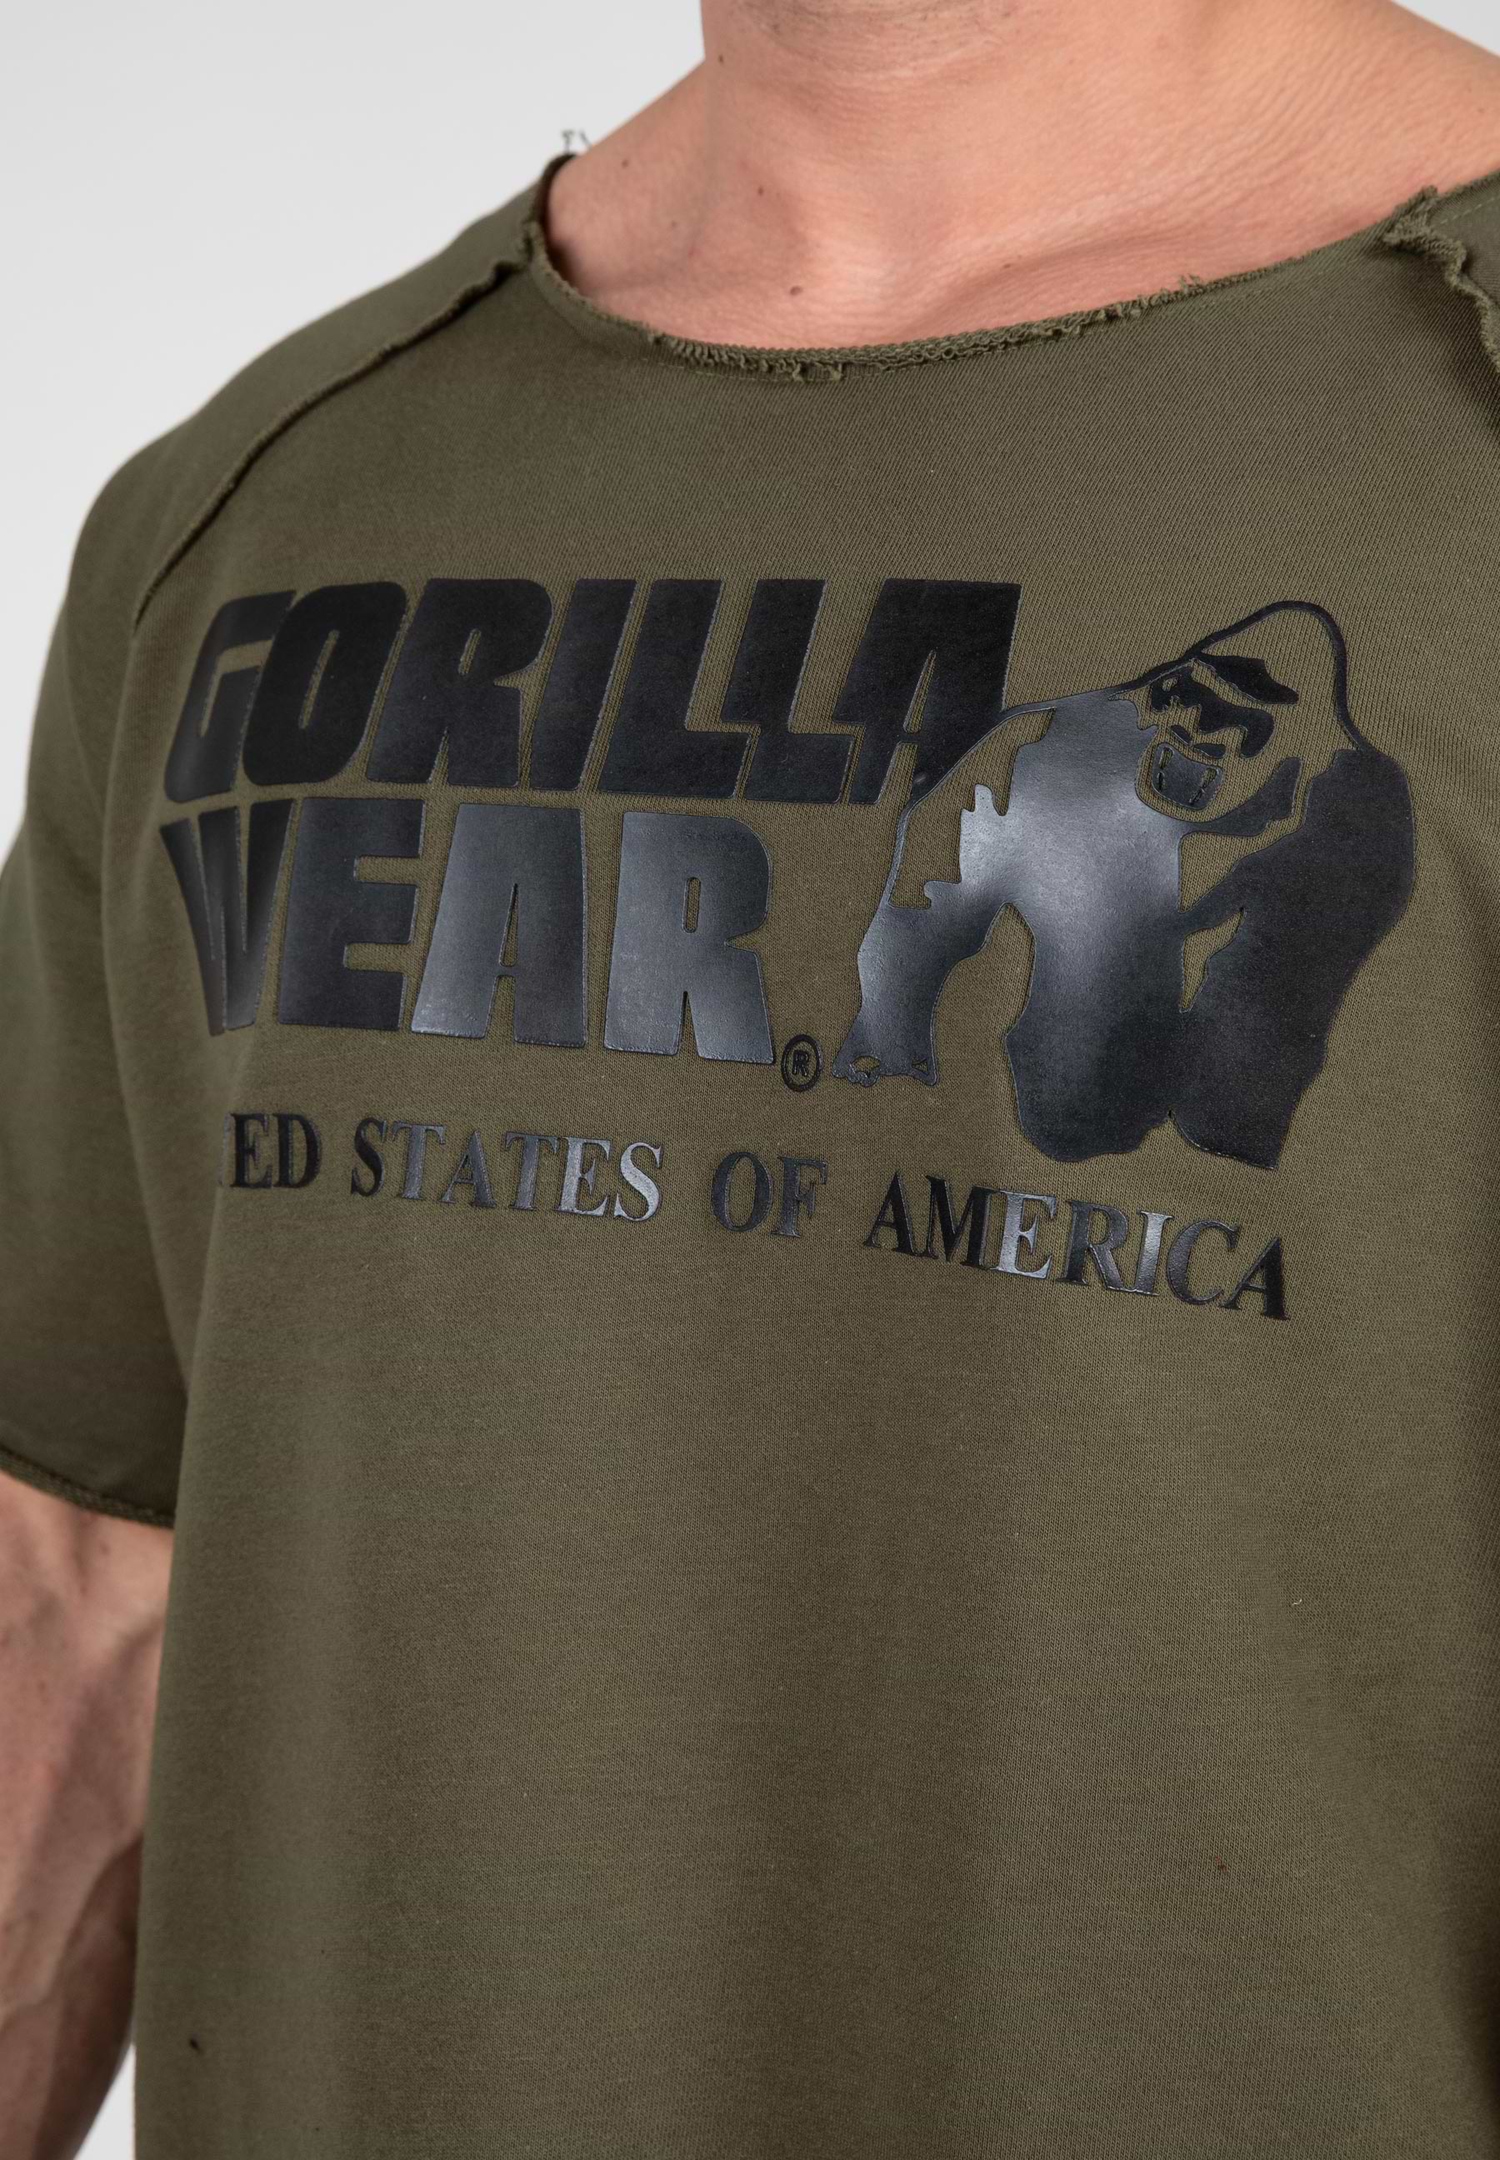 Gorilla Wear Classic Work Out Top Army Green